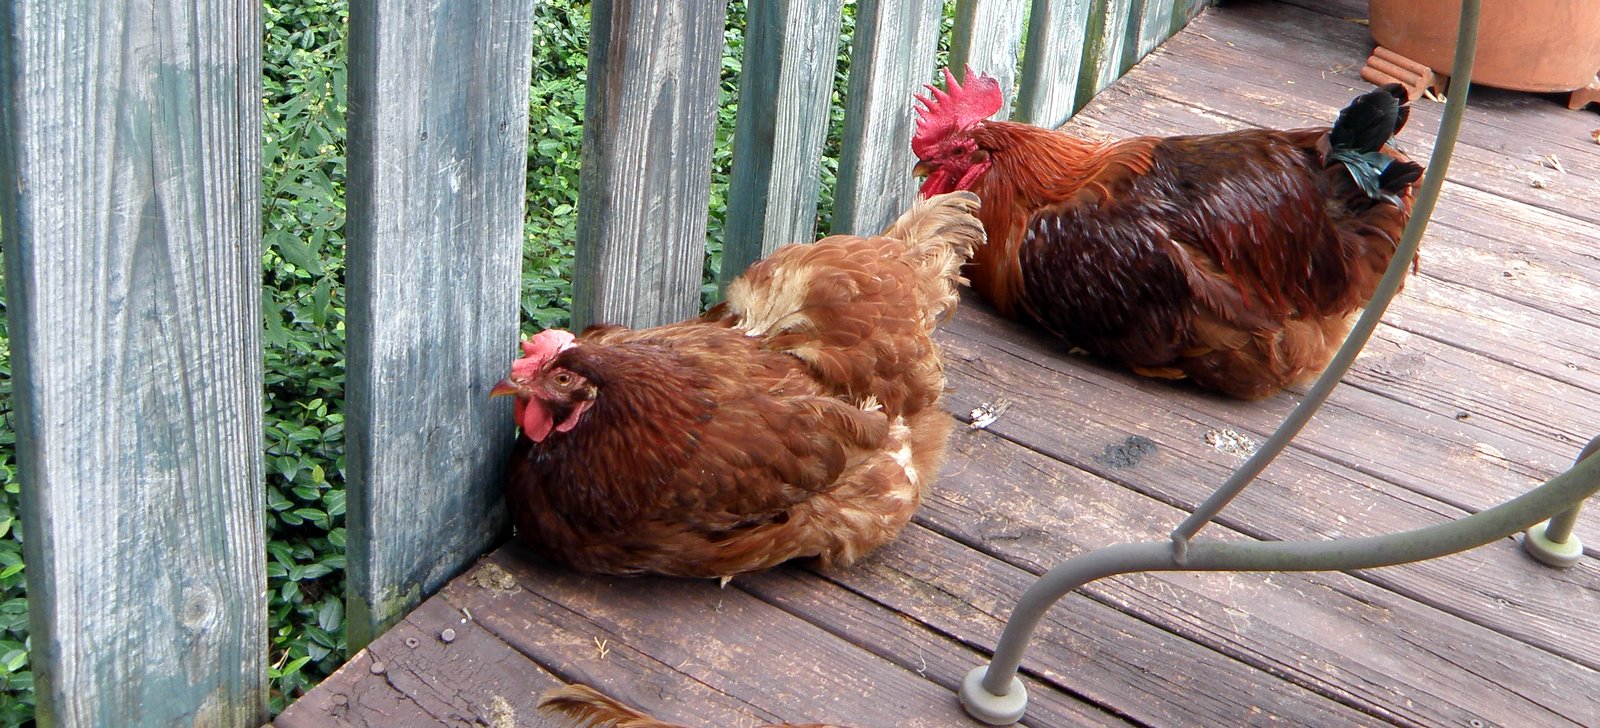 Antibiotic Use in Chicken Production |.